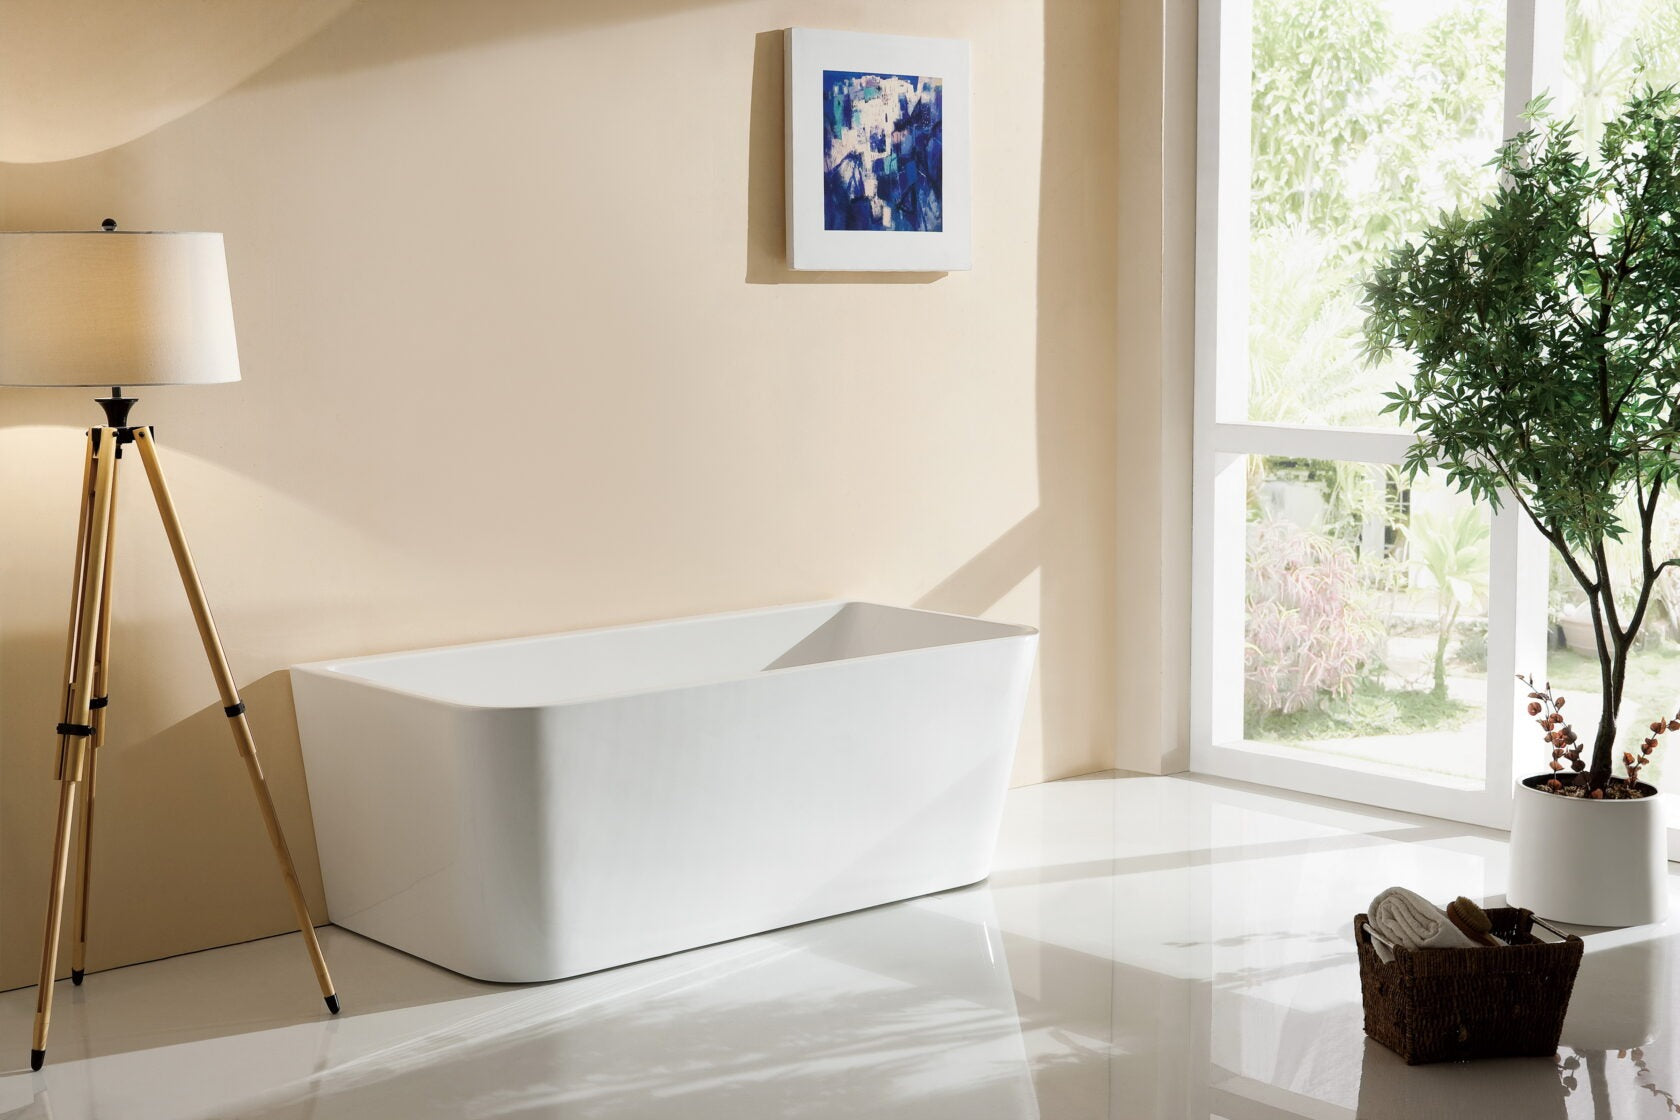 RIVA MANDY BACK TO WALL BATHTUB GLOSS WHITE (AVAILABLE IN 1500MM AND 1600MM)